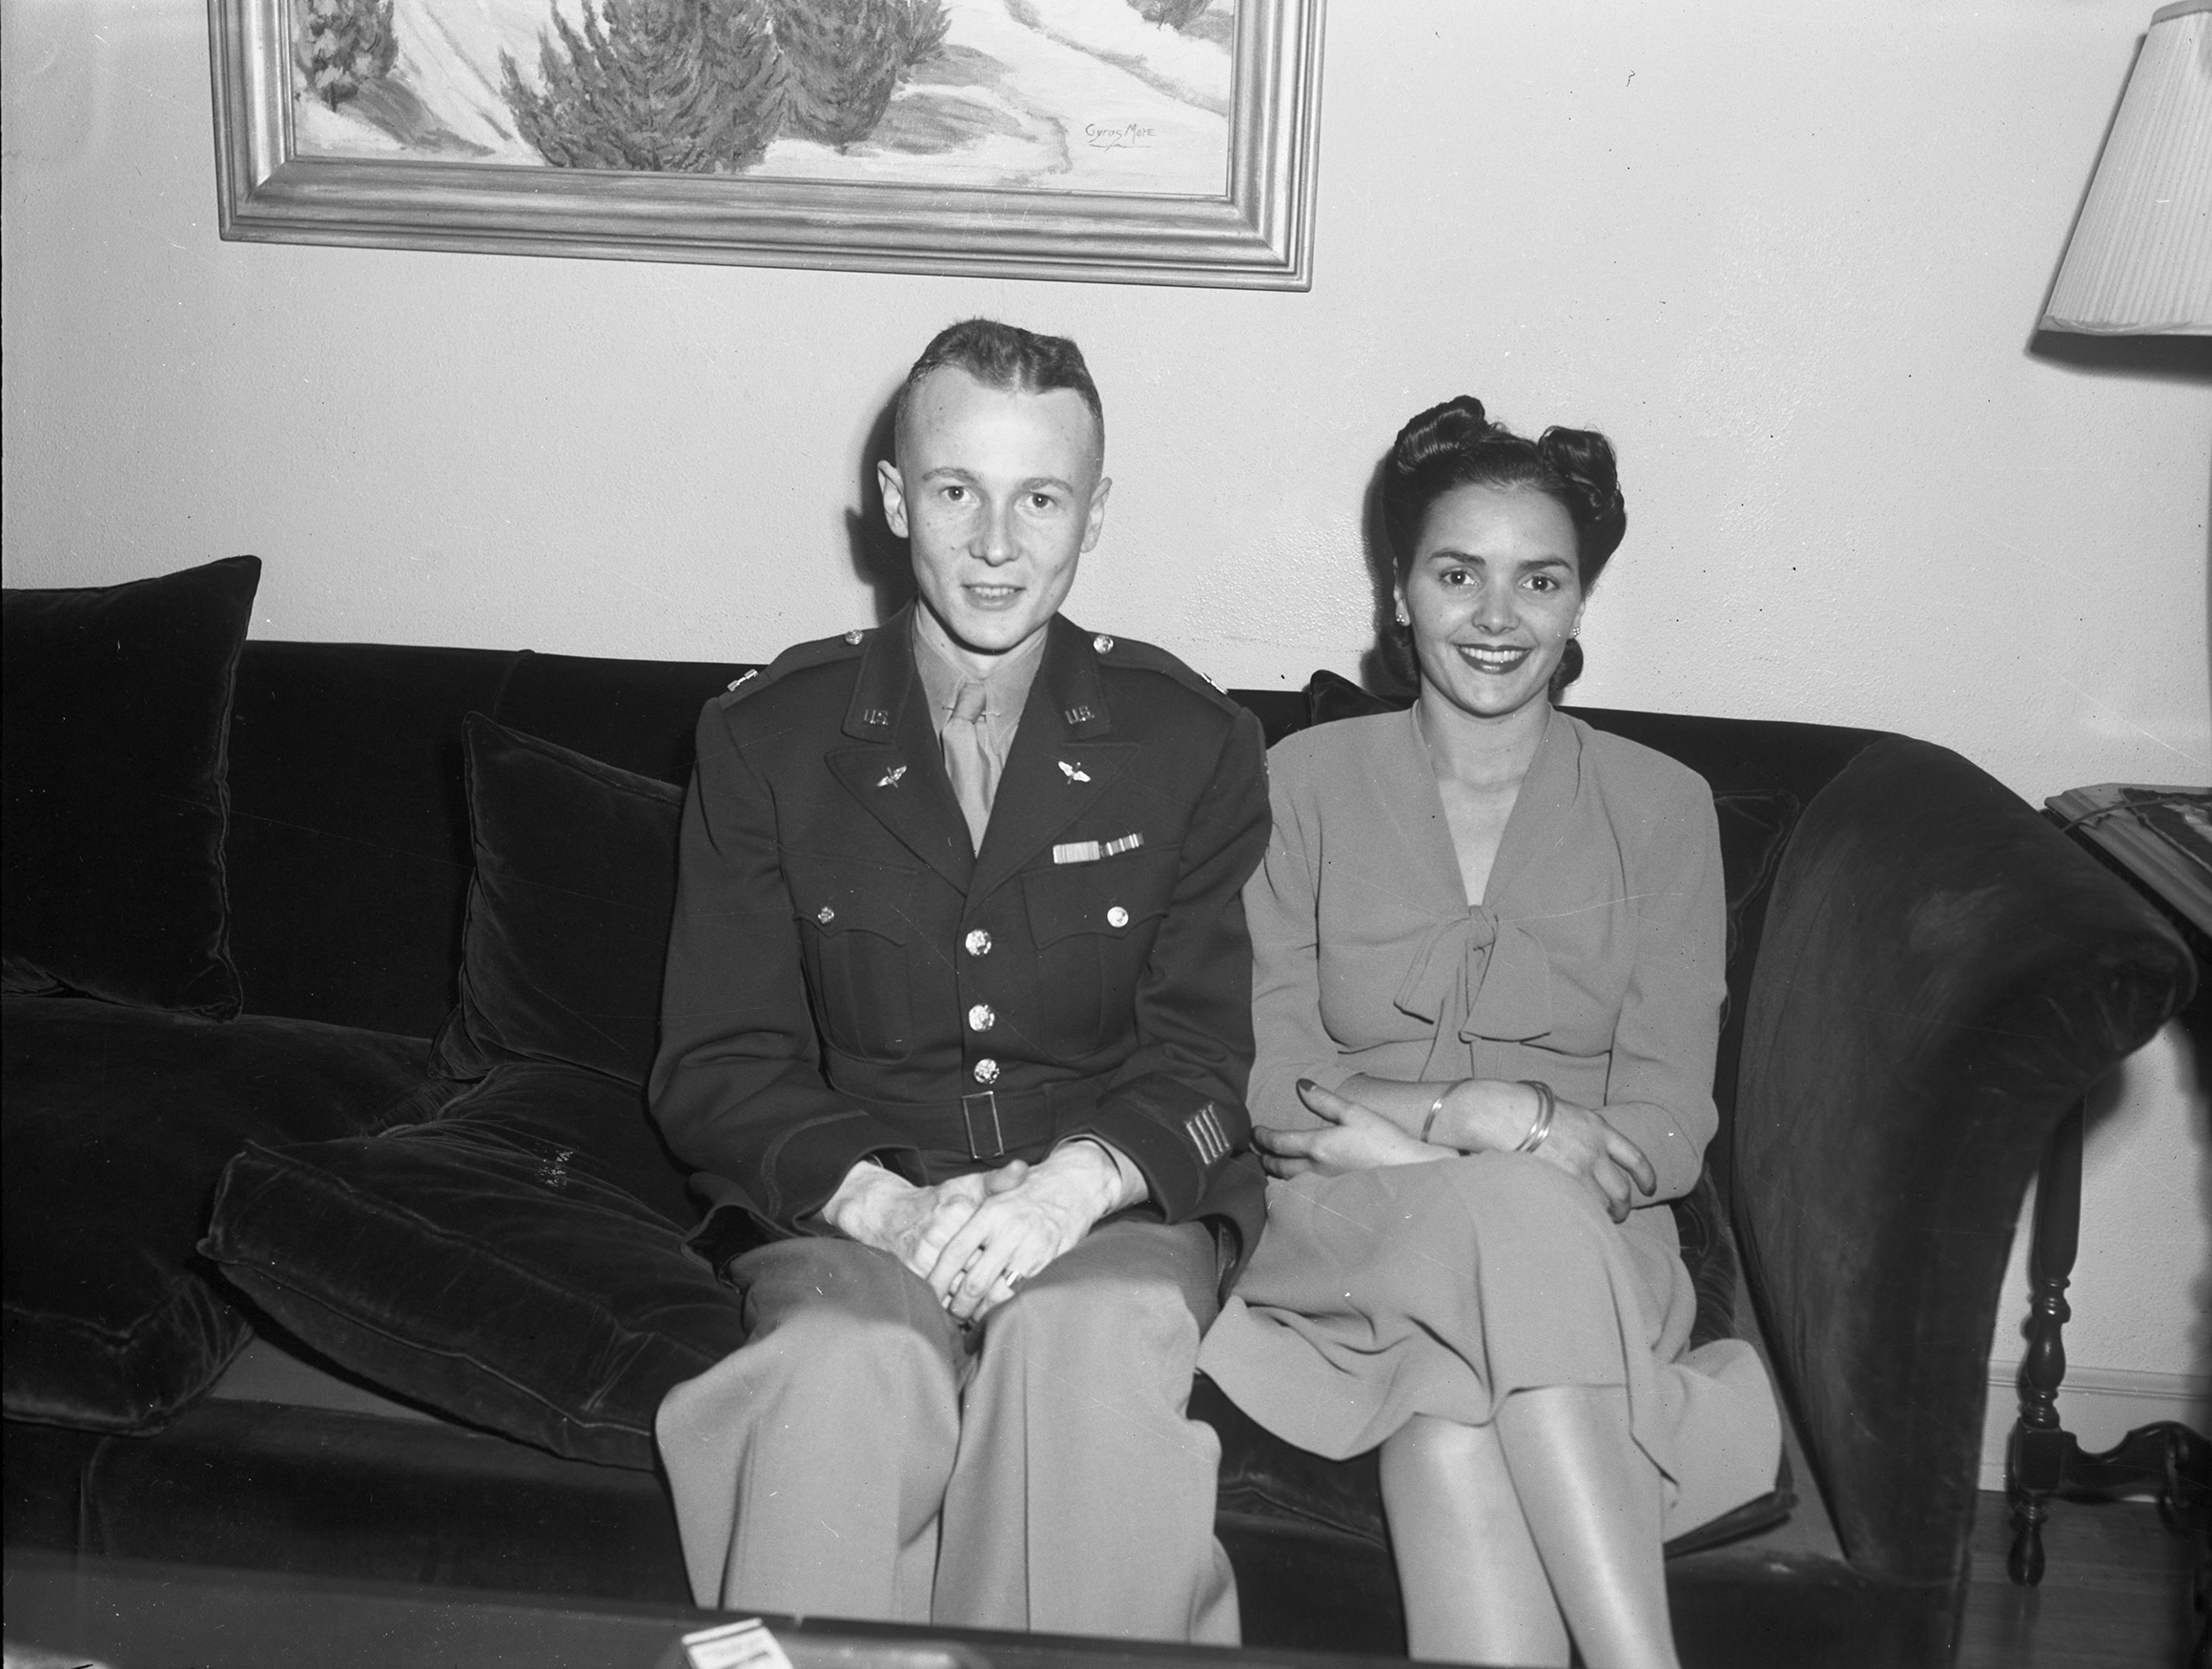 Captain Lee Sturges Thomas and his wife | UTA Libraries Digital Gallery